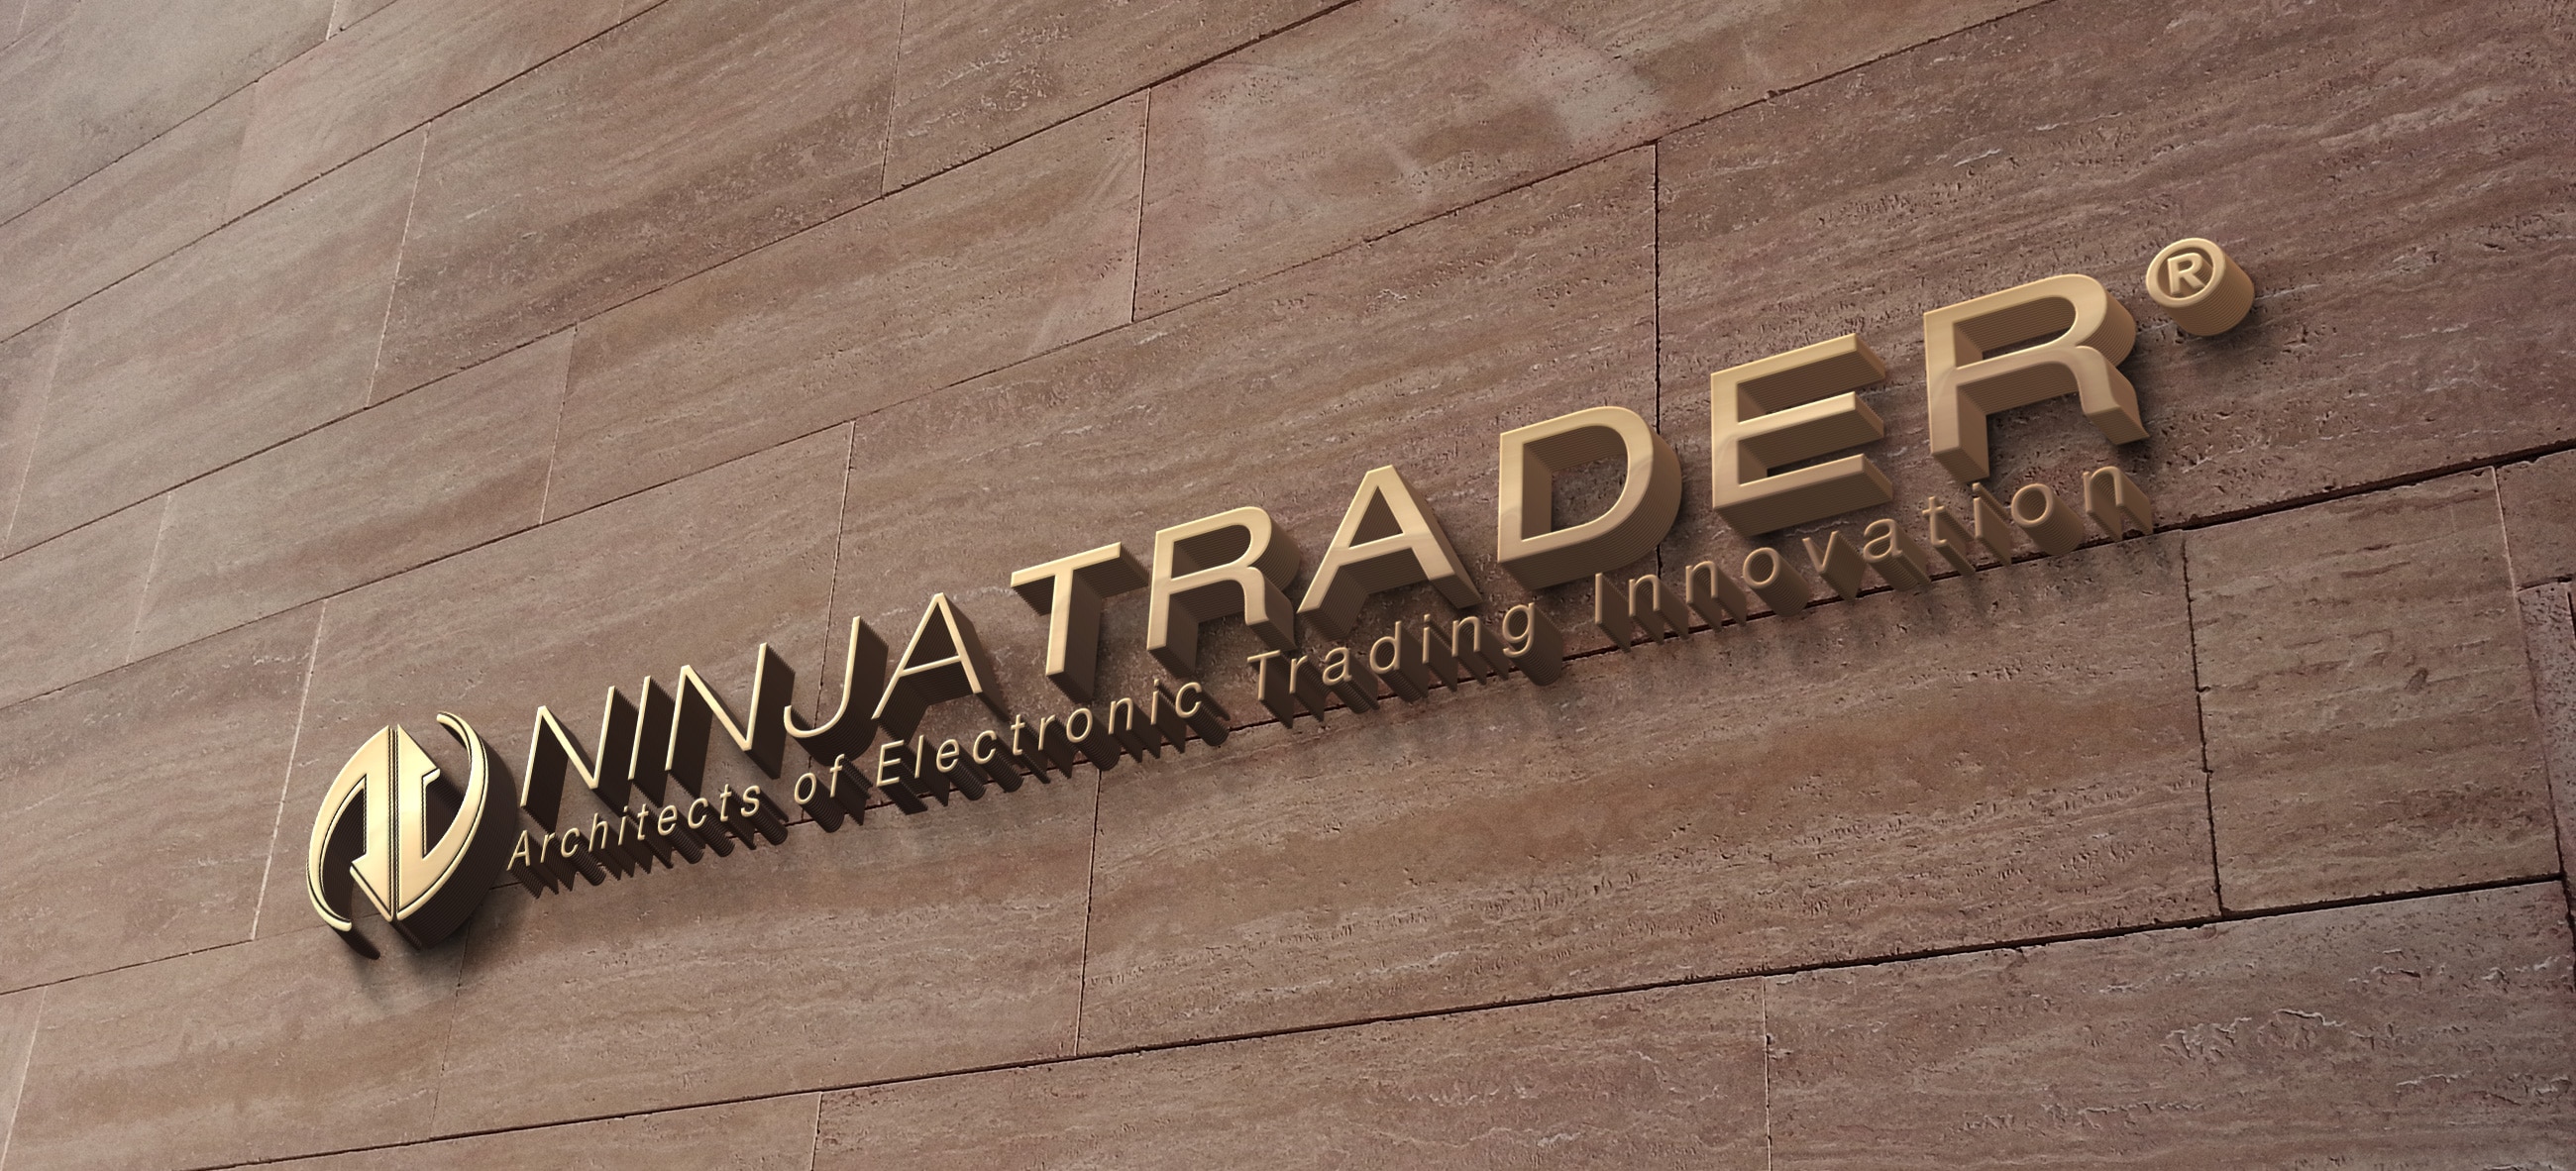 NinjaTrader Group Adds Forex Trading to its Brokerage Services